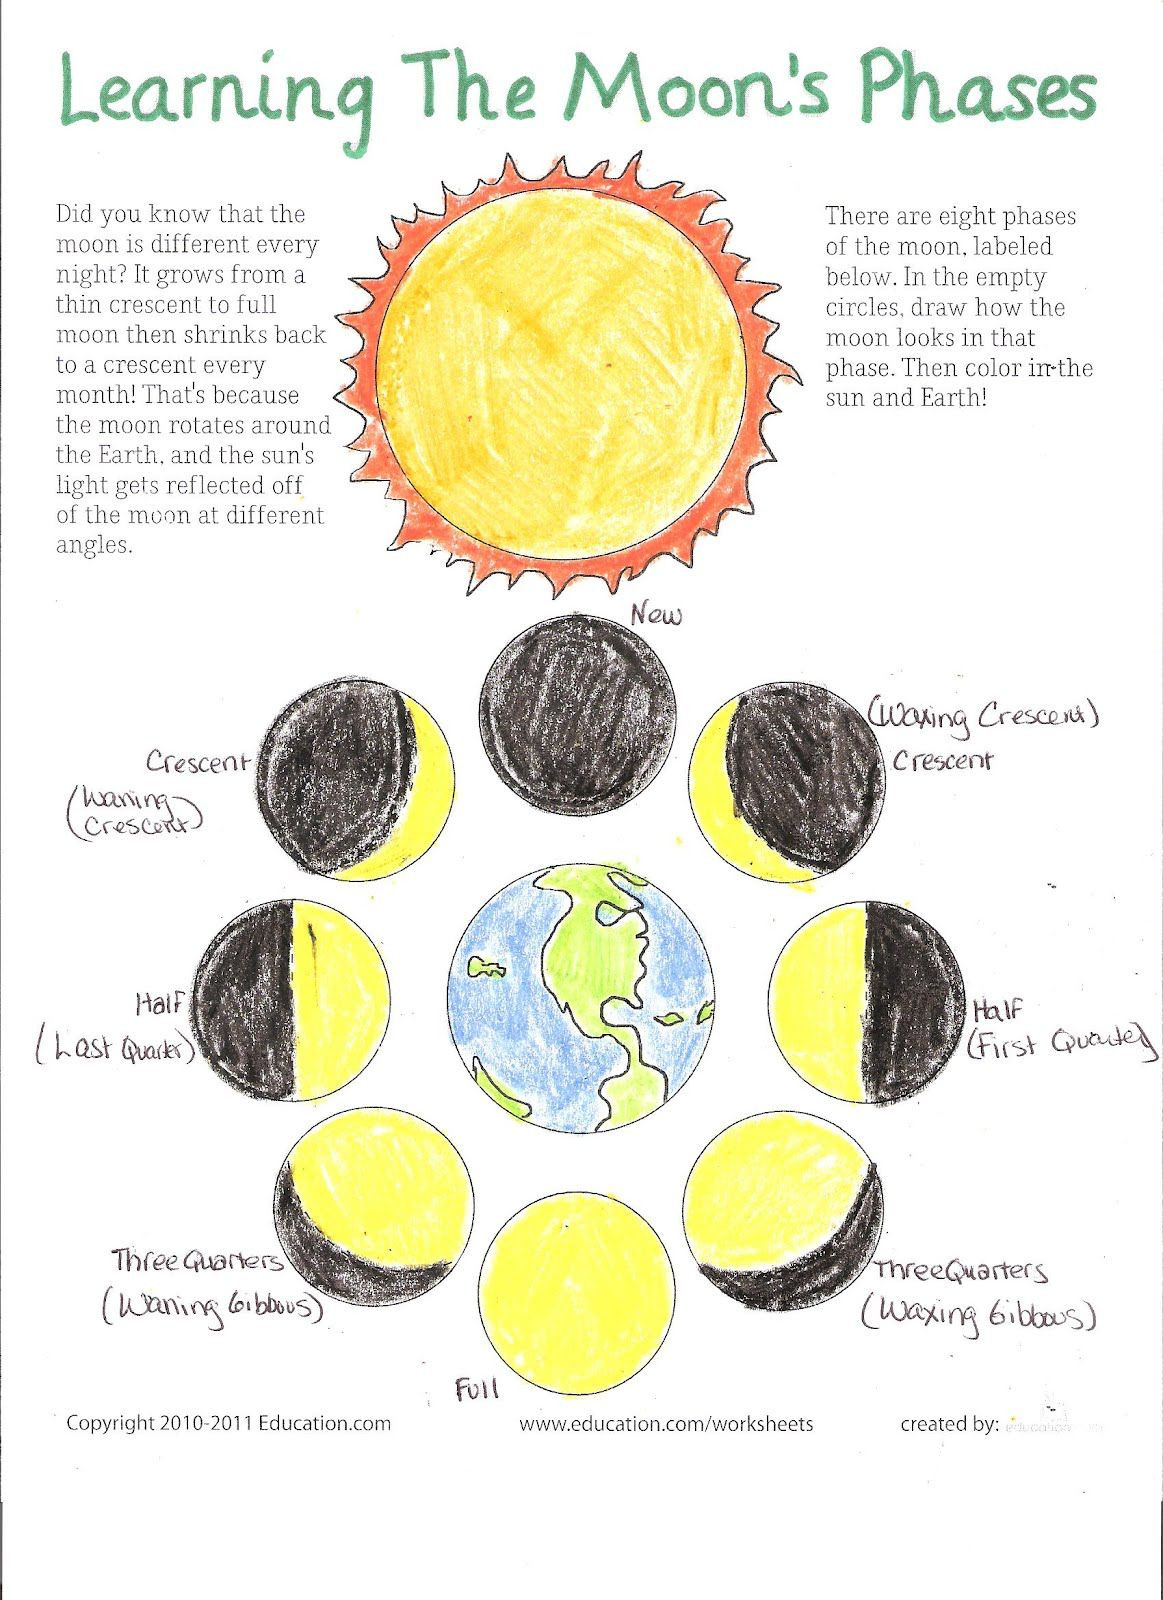 Moon Phases Worksheet Answers why I Am Not Giving Up for Lent